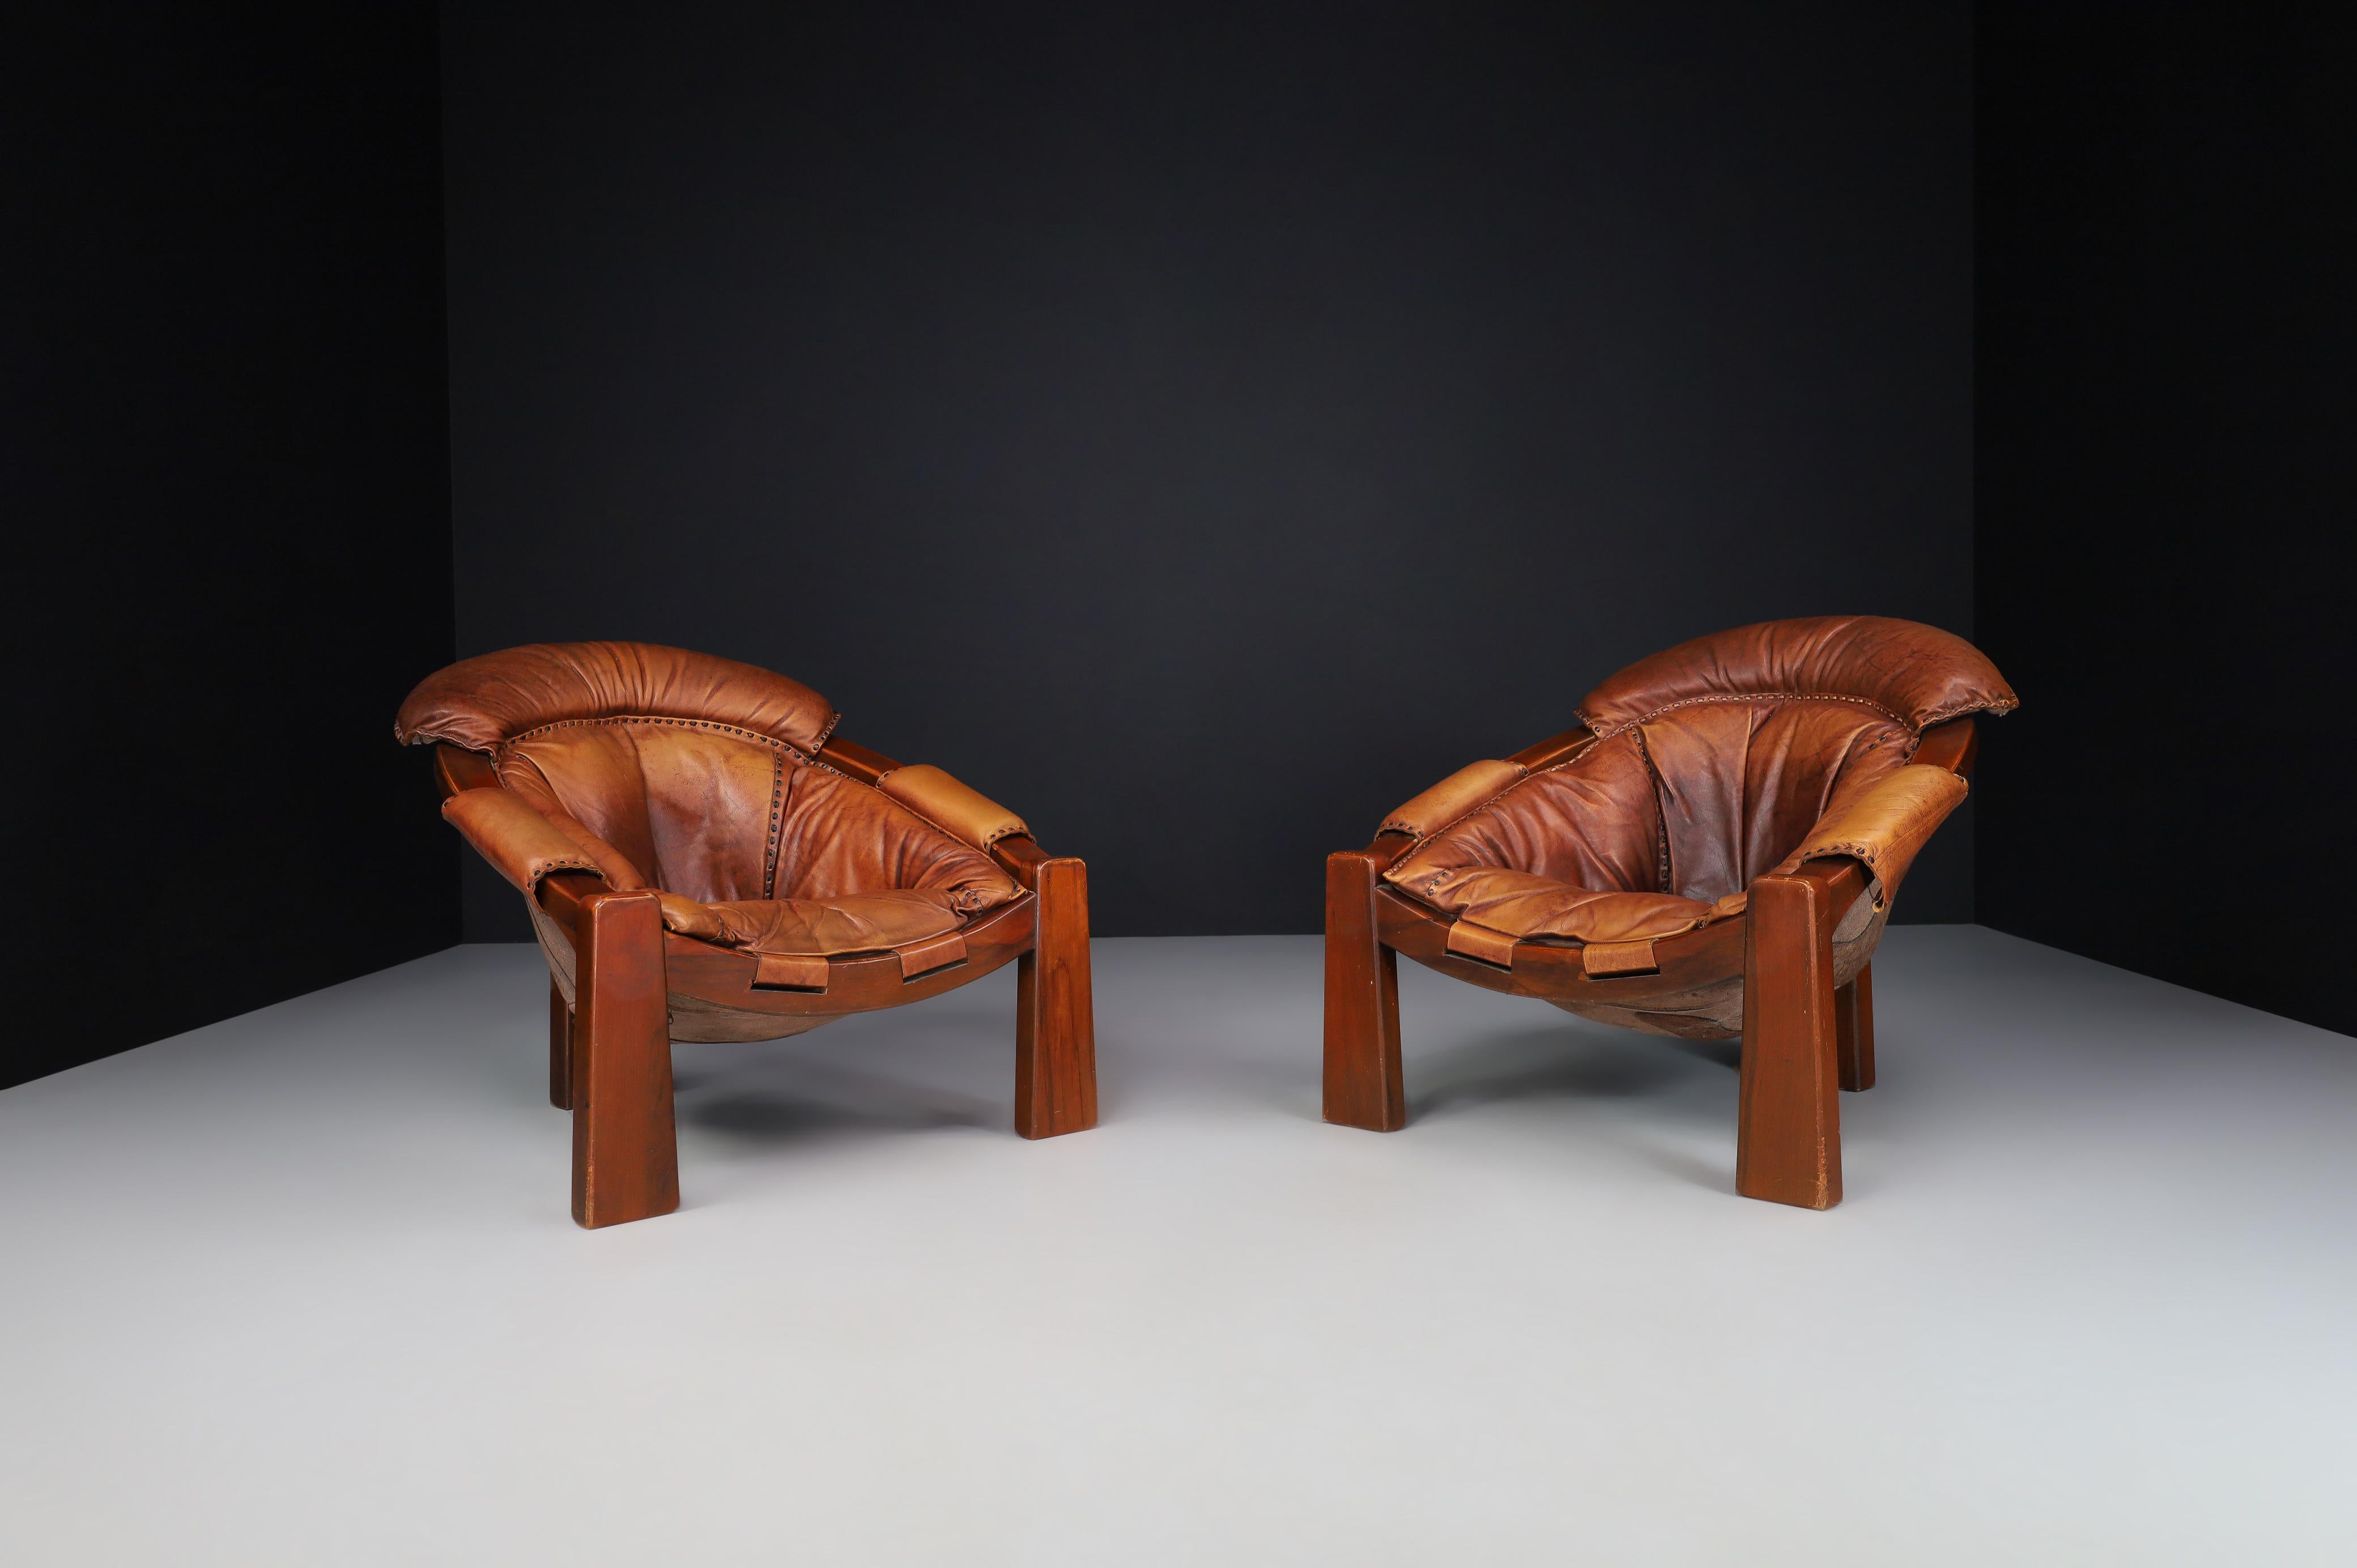 Brutalist Luciano Frigerio patinated cognac leather lounge chairs, Italy, 1970s

Luciano Frigerio created these Brutalist lounge chairs in Italy in the 1970s. These chairs have a solid walnut frame, a thick cognac leather seat, and a fantastic